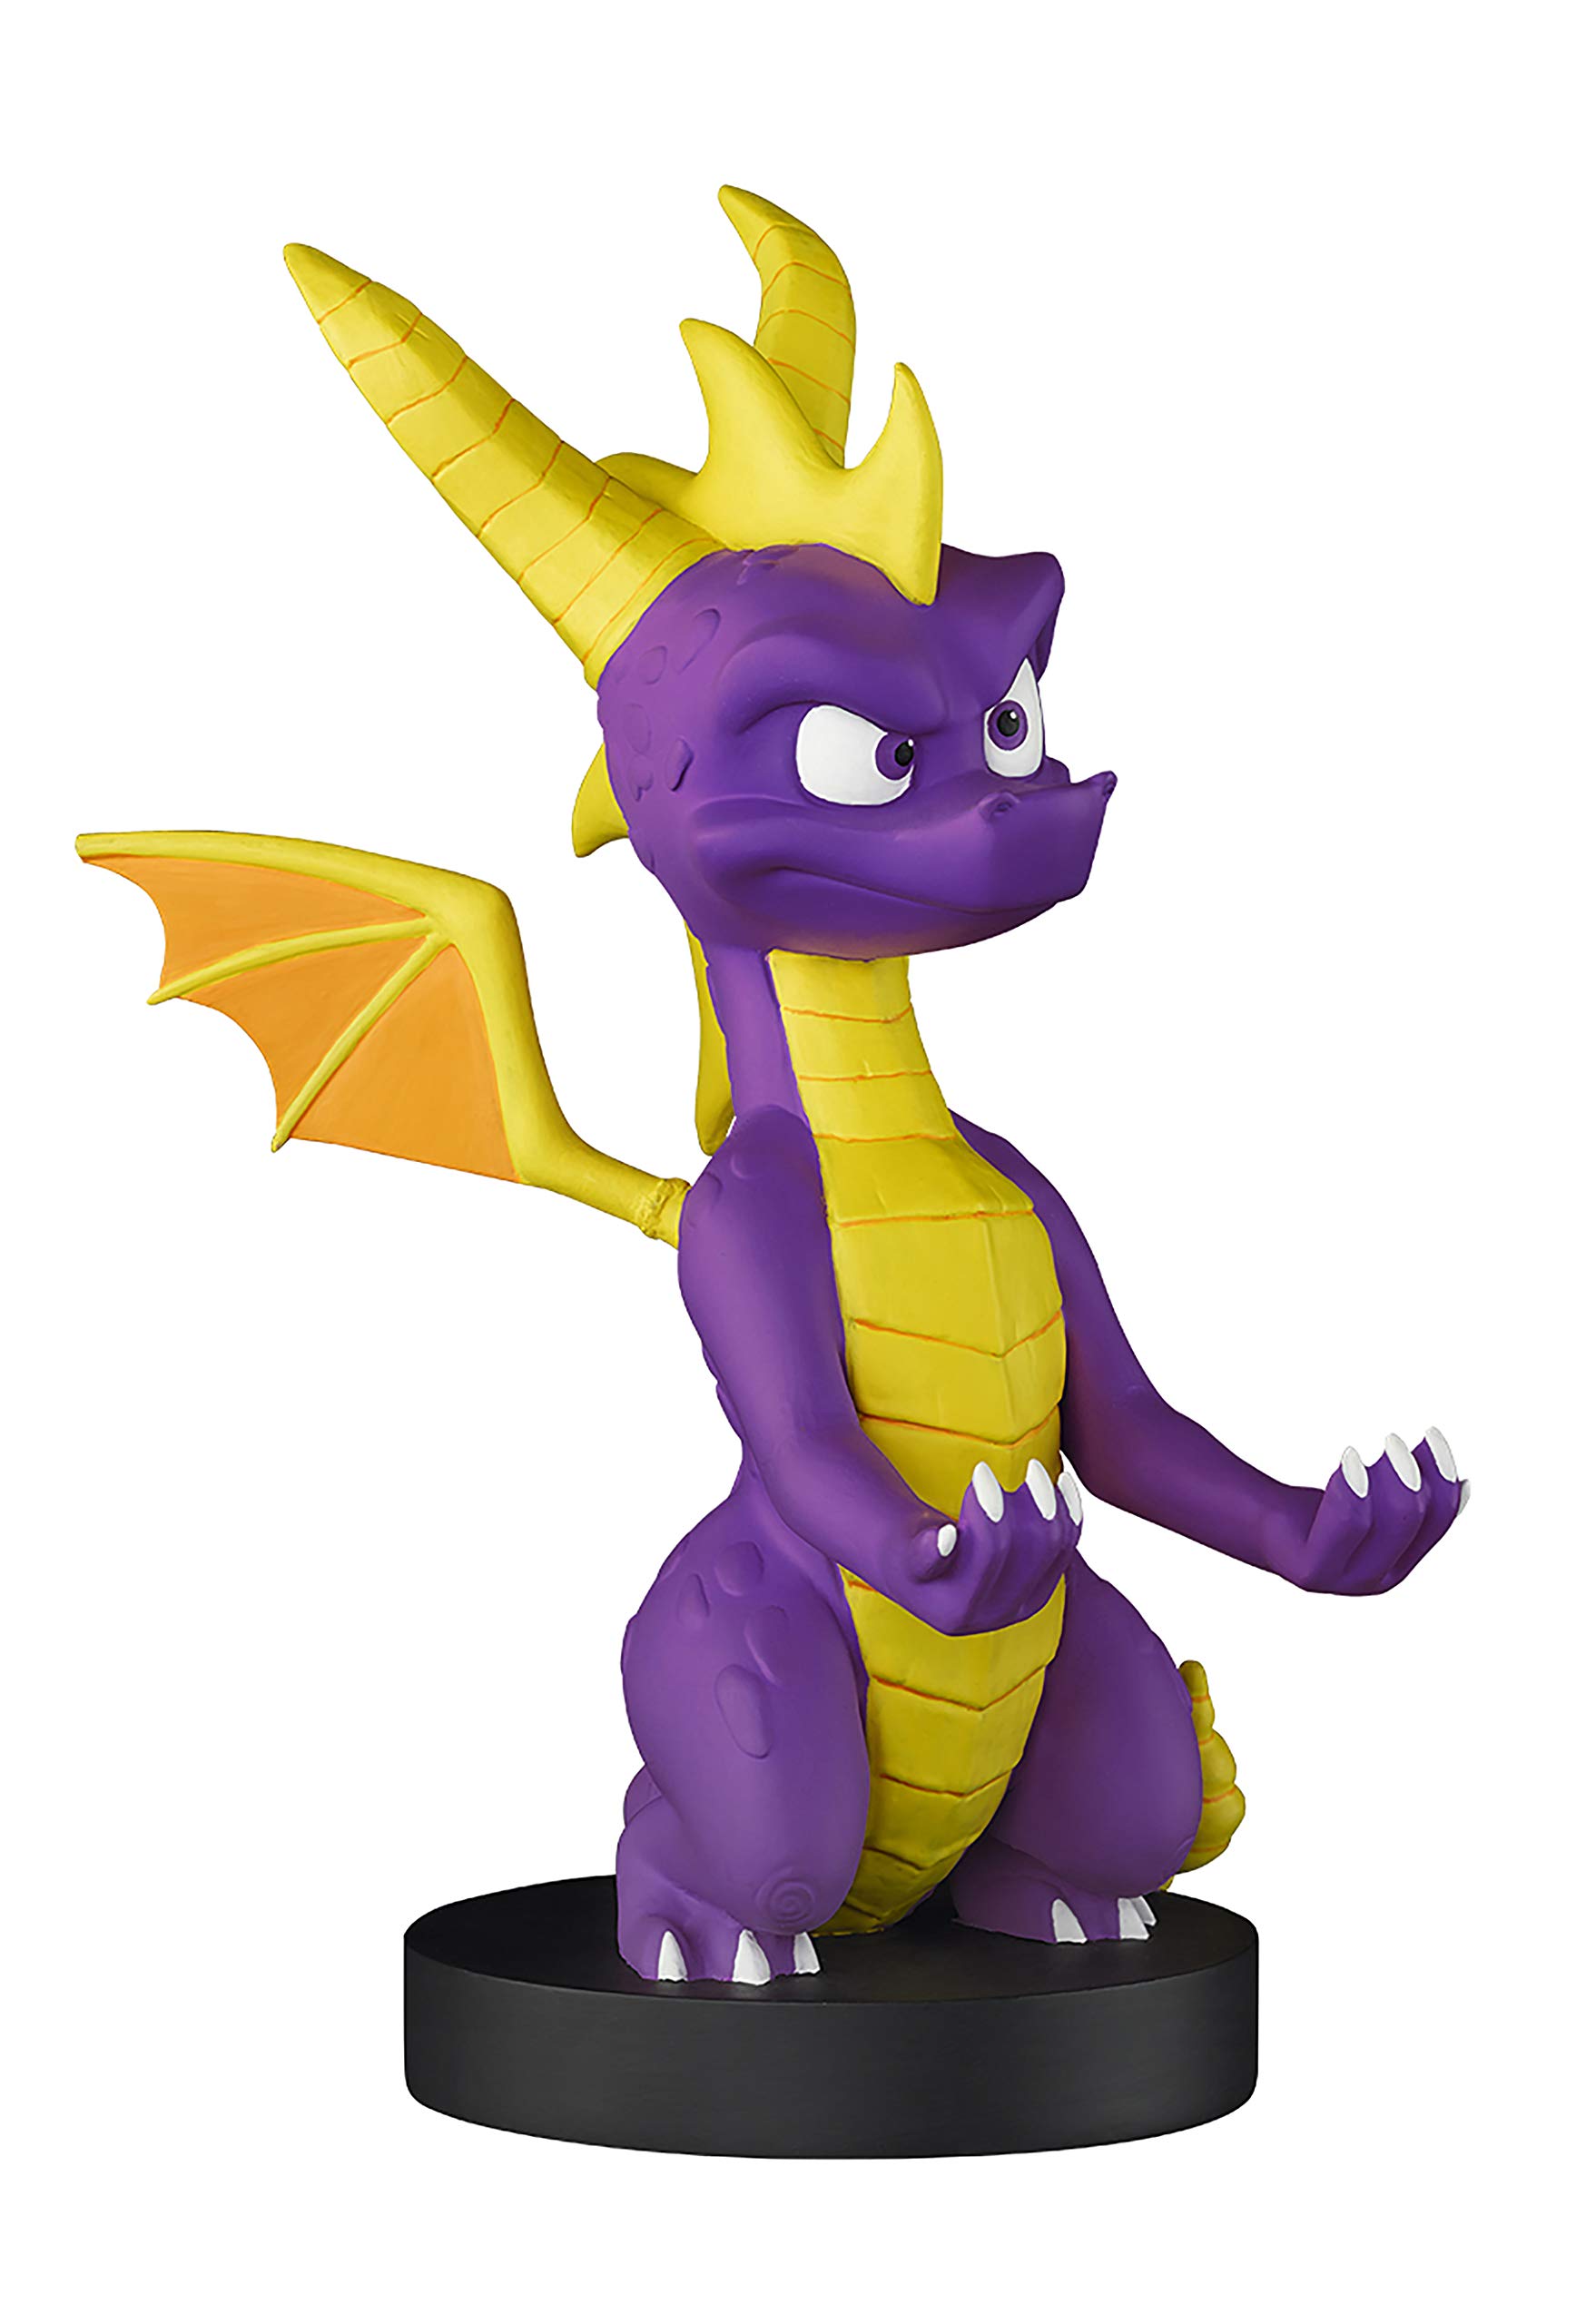 Exquisite Gaming: Spyro Cable Guy, Holds PlayStation and Xbox Game Controllers, Stands 8'' Tall, Comes with a 2M Cable for Charging your Device, Works with all Smart Phones